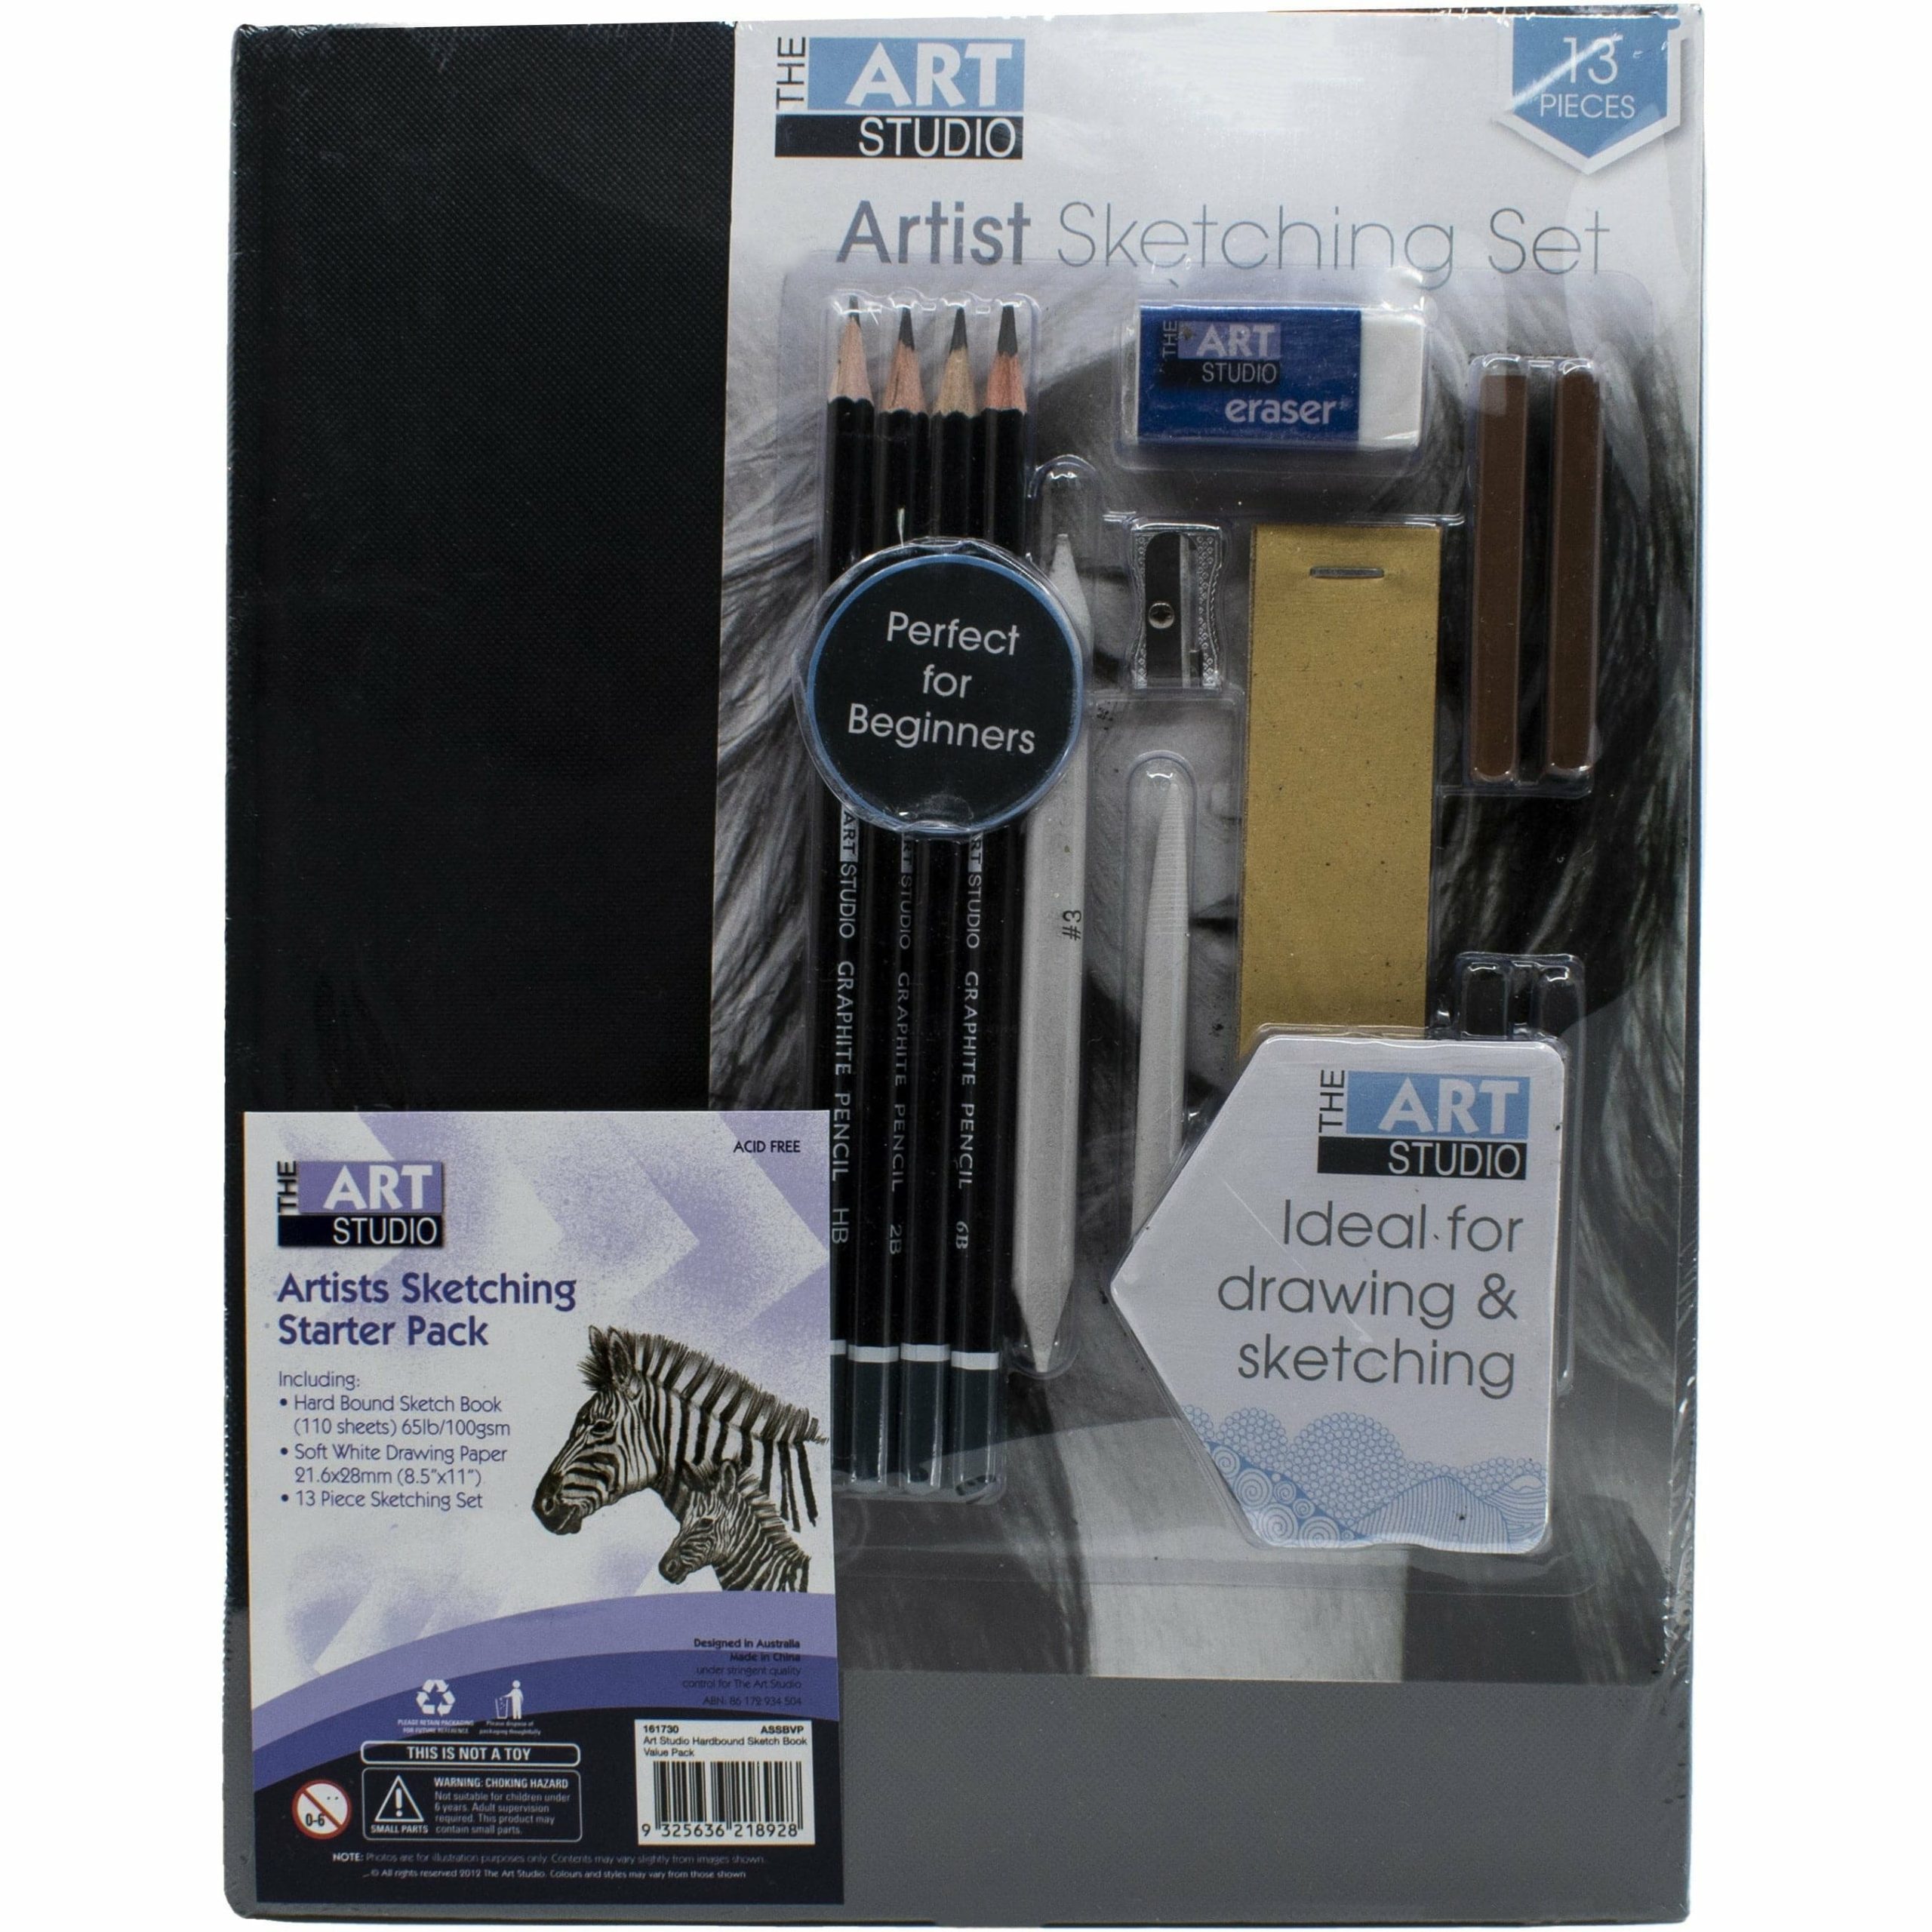 The latest The Art Studio Artist Sketching Starter Pack 637 version is now  available at a price that is incredibly affordable! Prices